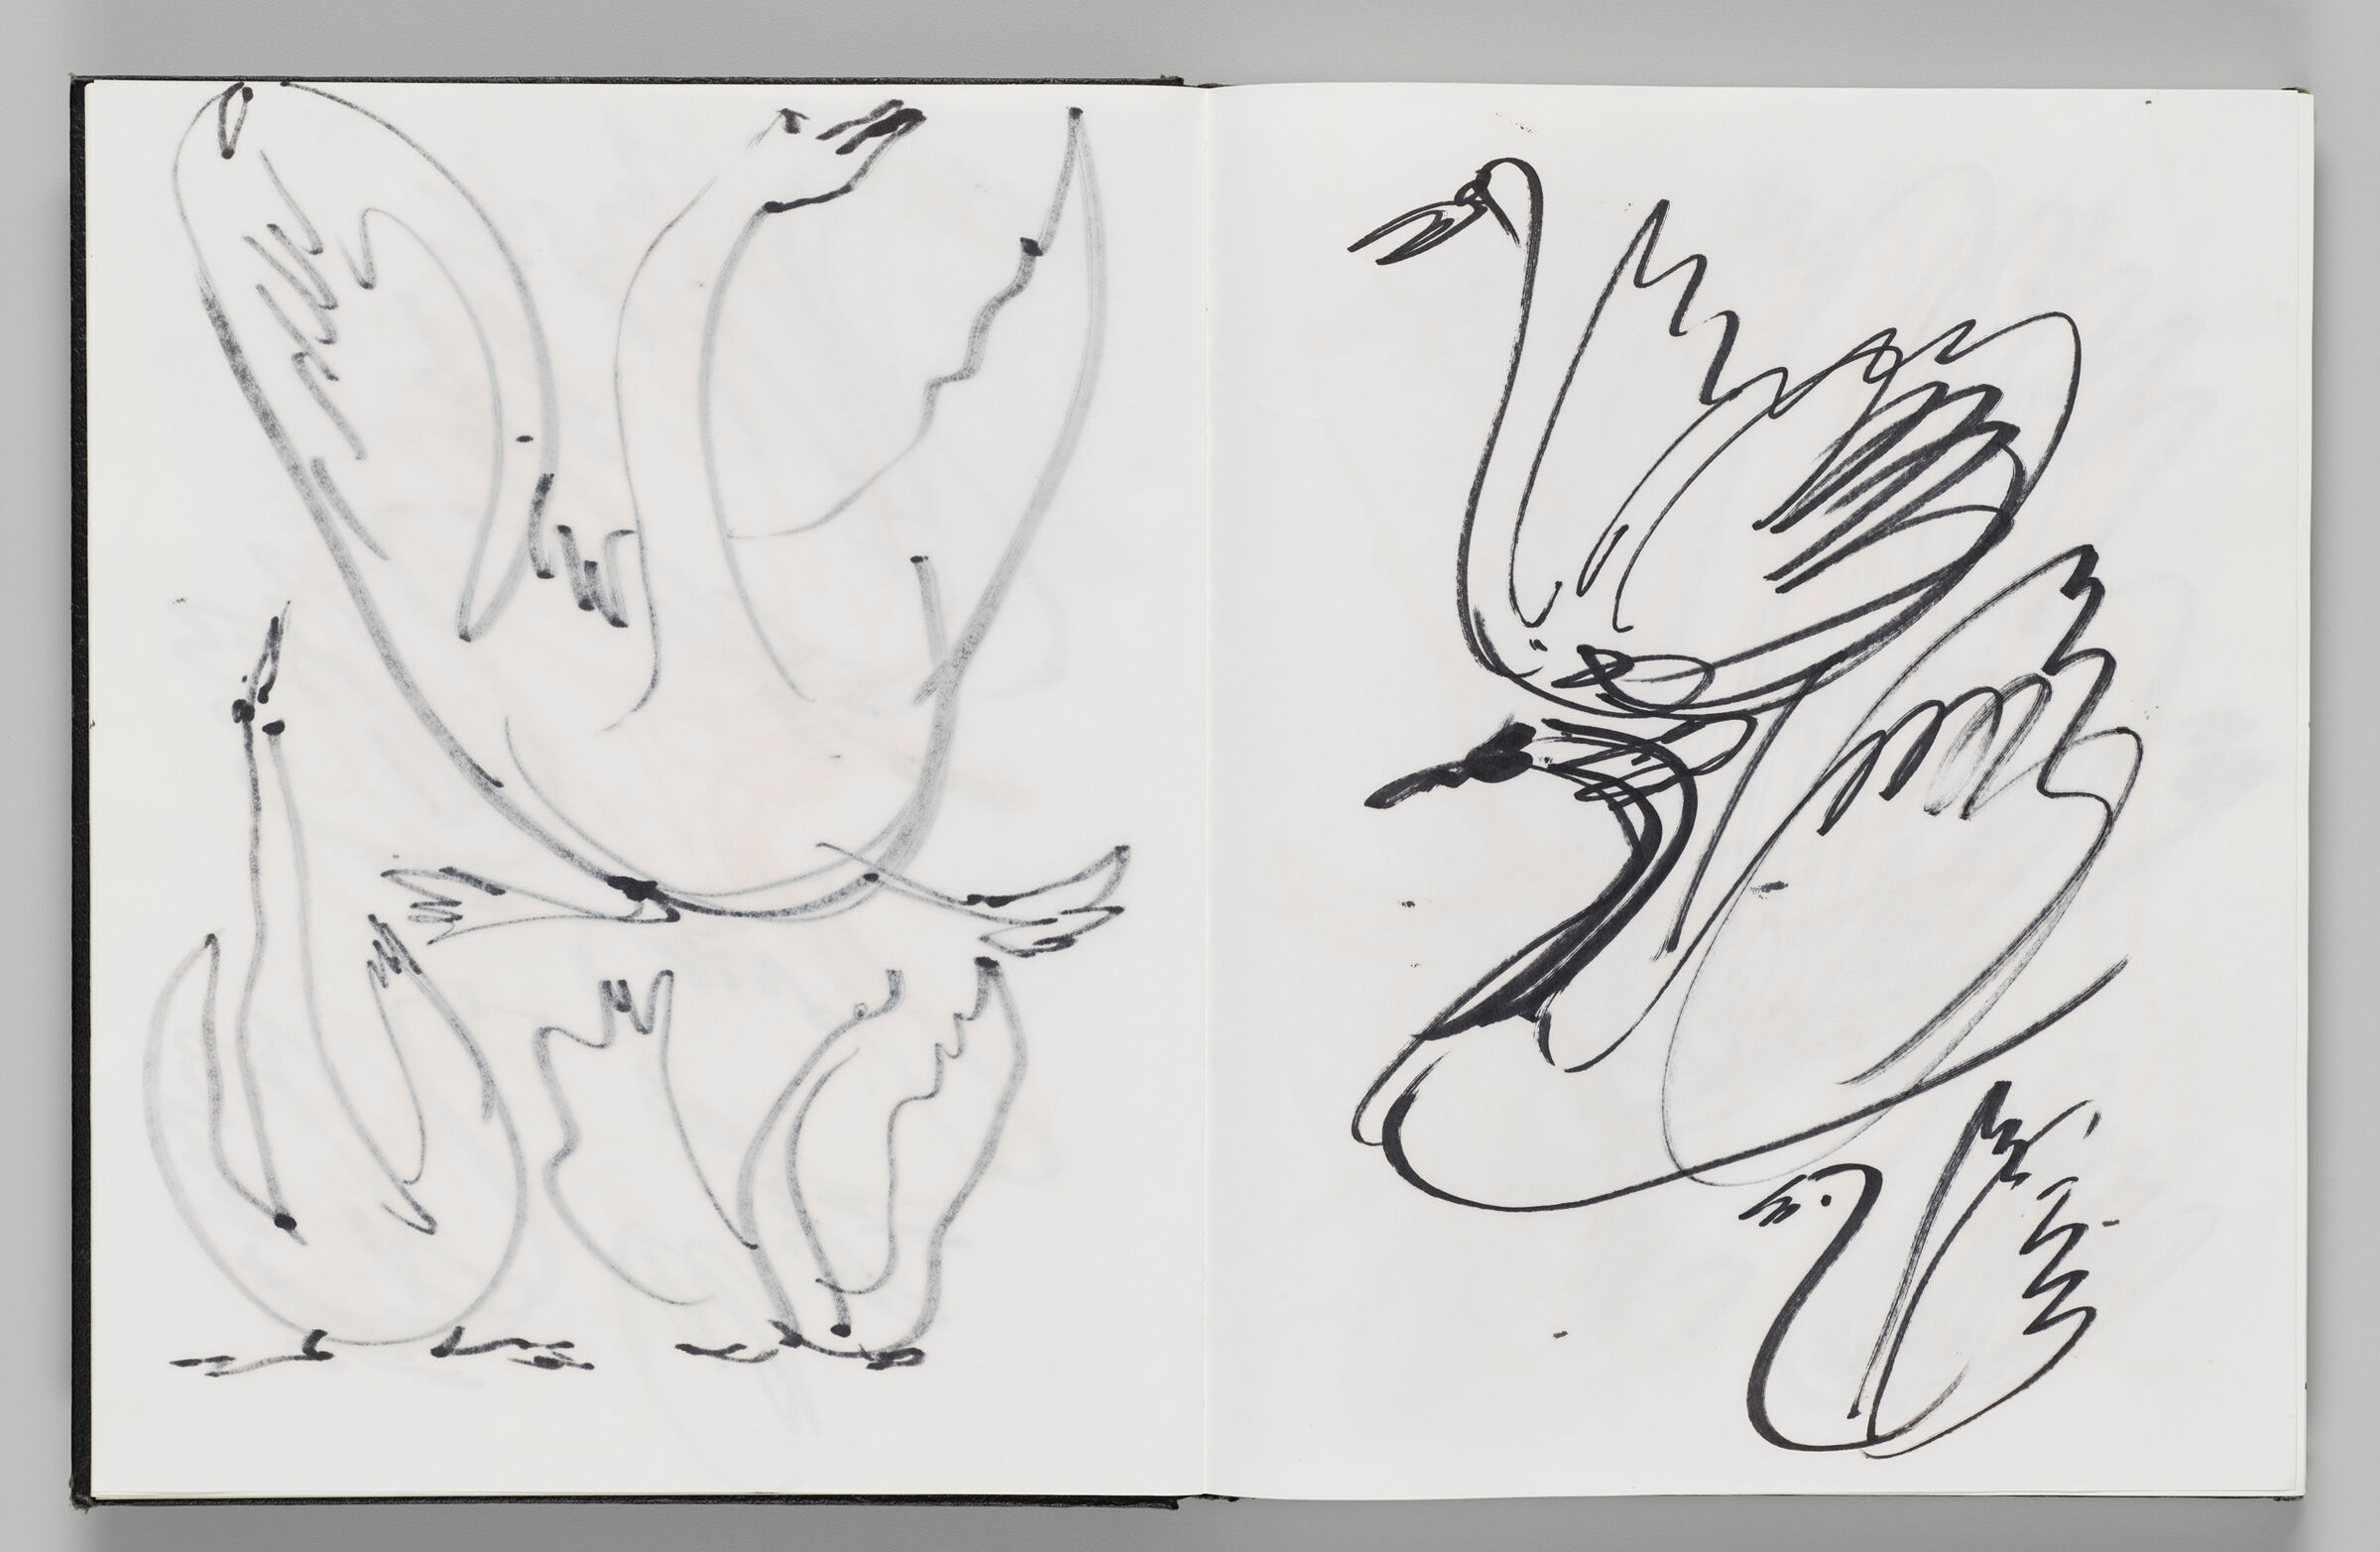 Untitled (Bleed-Through Of Previous Page, Left Page); Untitled (Black Swans, Right Page)